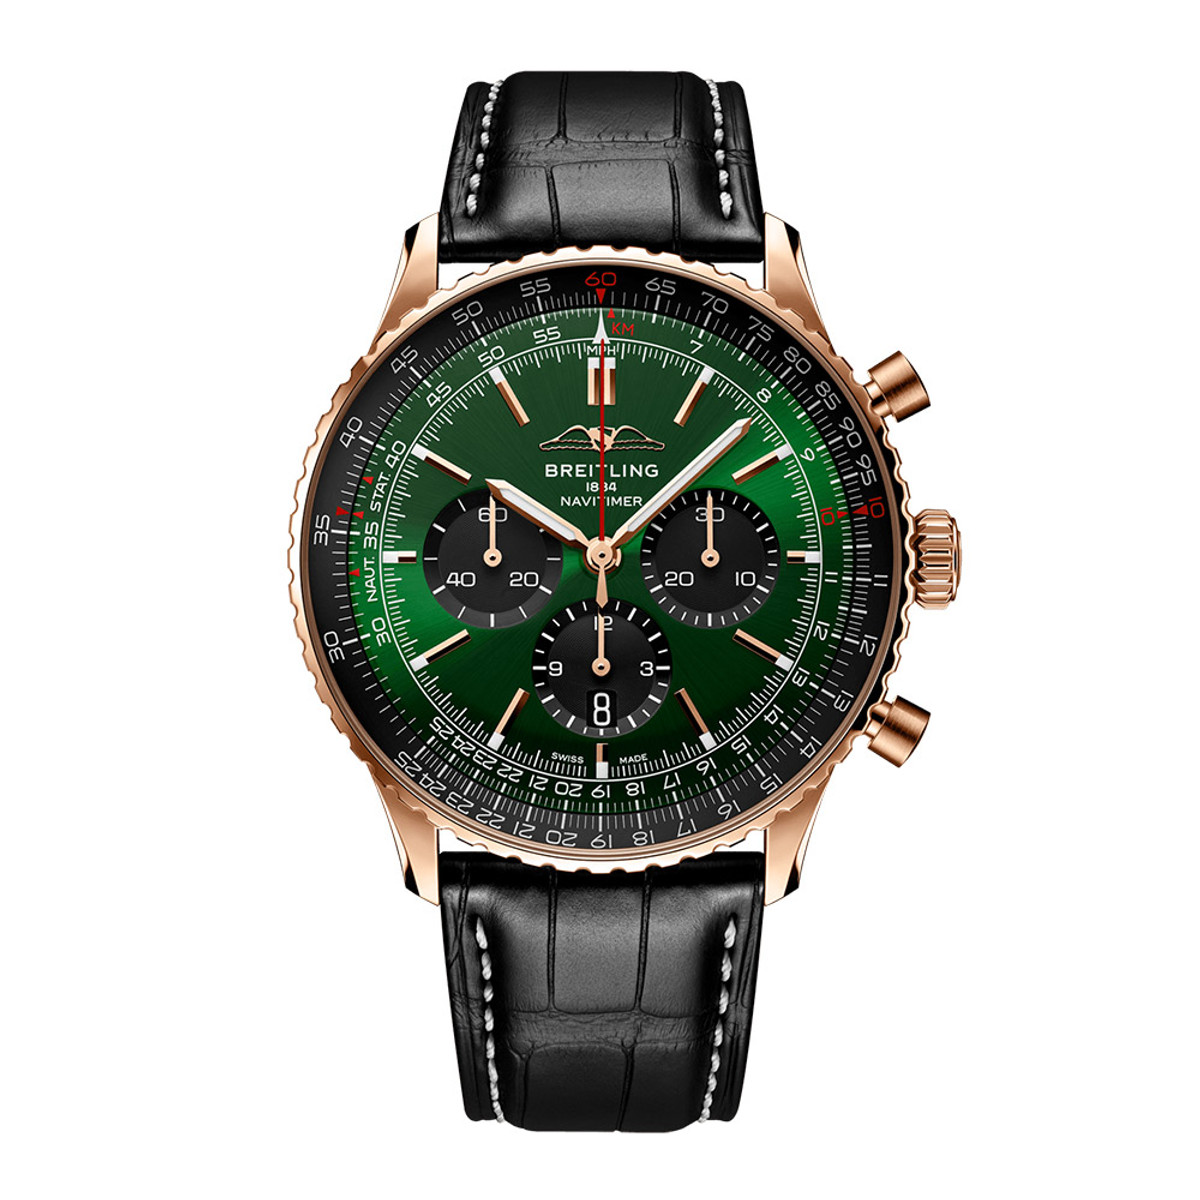 Breitling Navitimer 46 B01 Automatic Chronograph 18K Rose Gold RB0137241L1P1-63219 Product Image